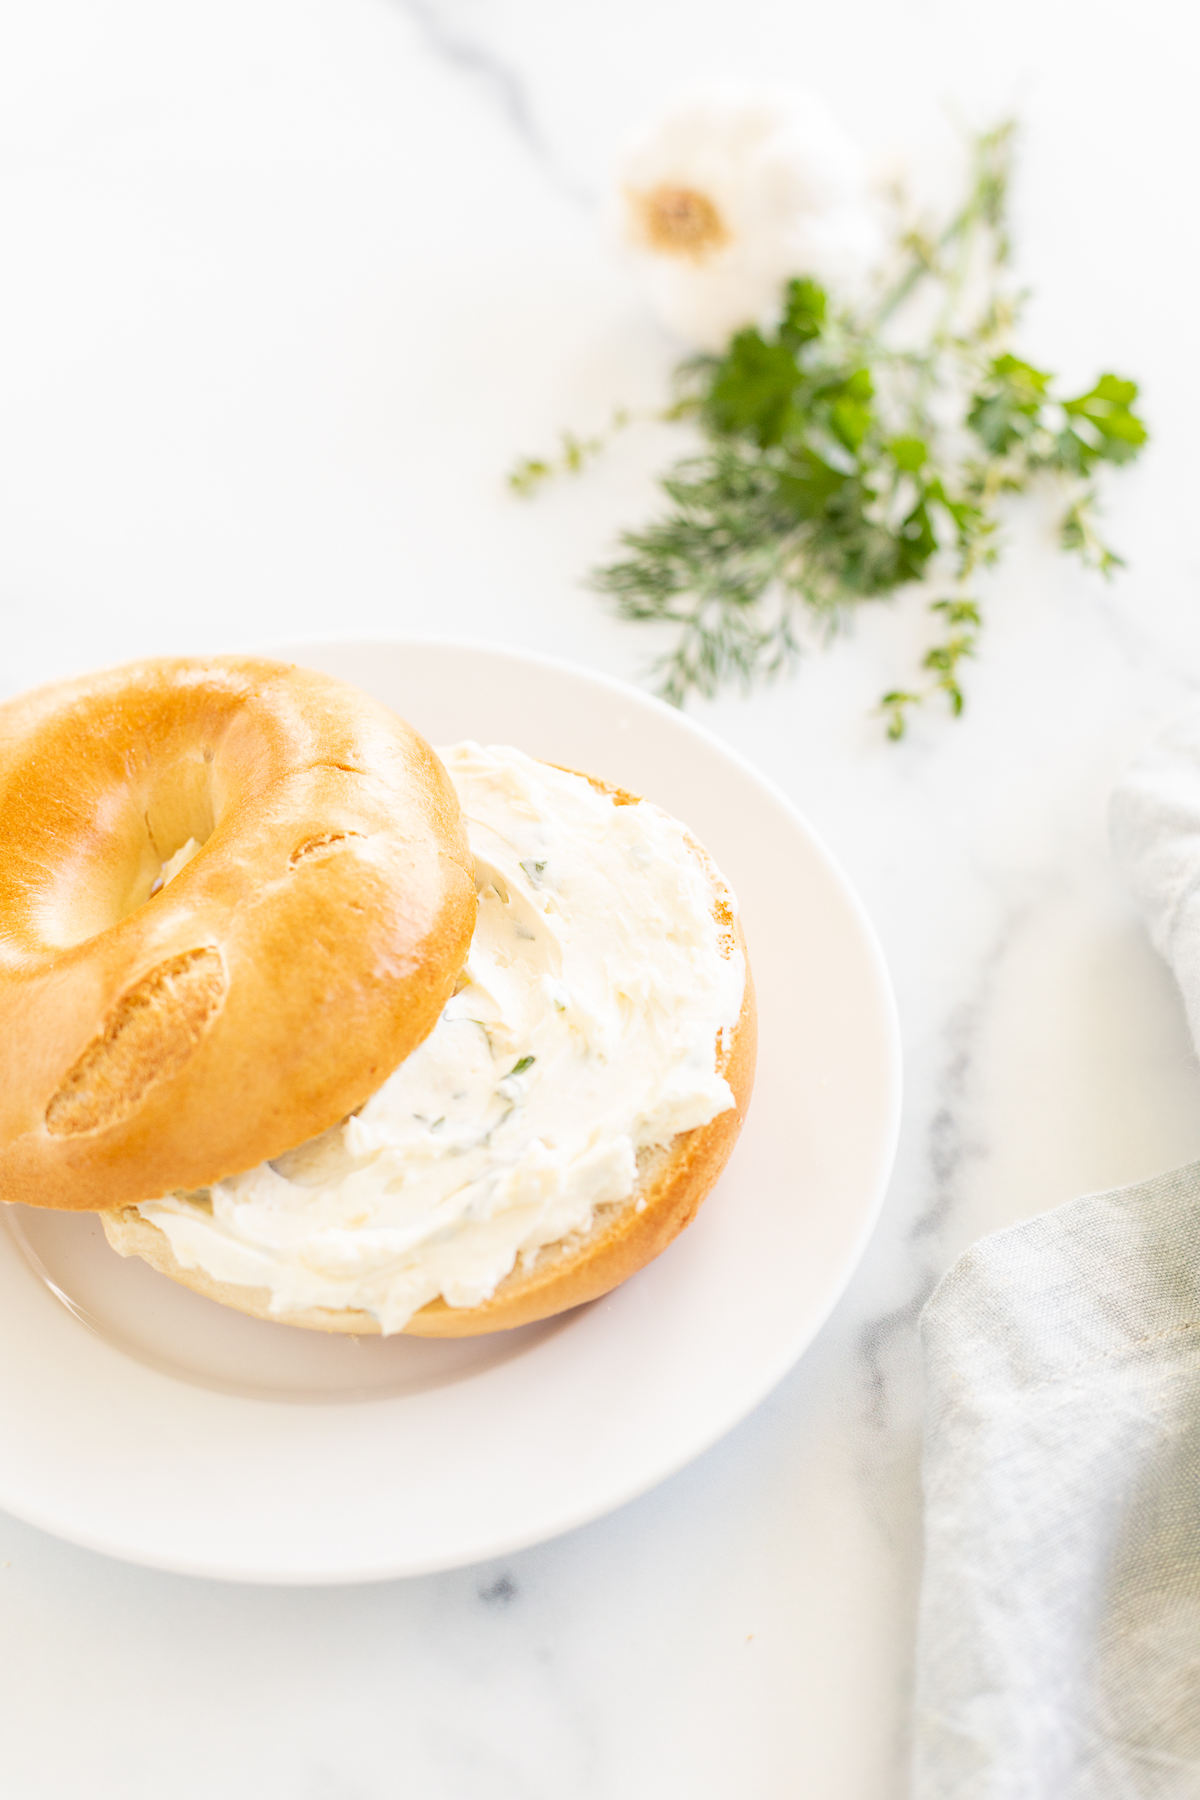 A bagel topped with garlic and herb cream cheese on a white plate.